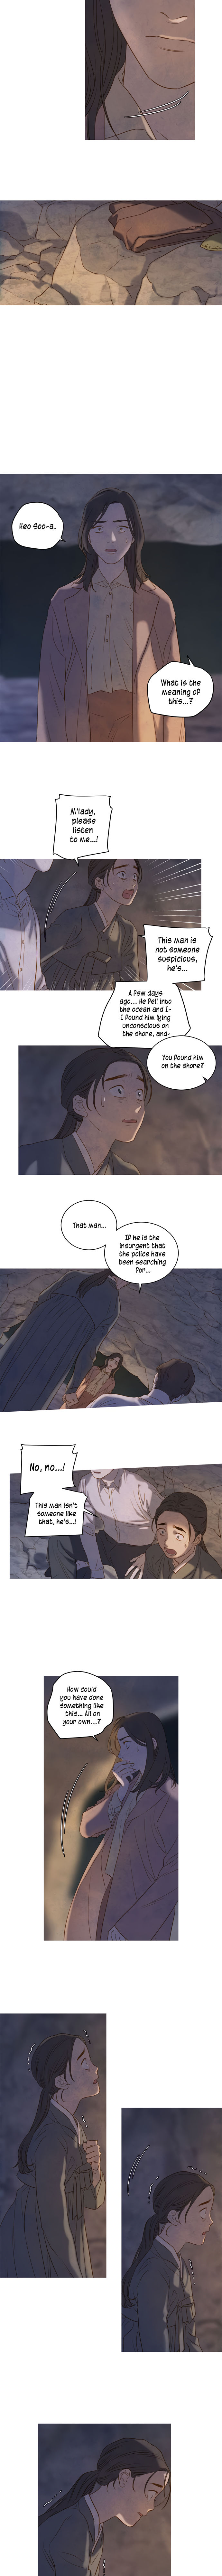 Gorae Byul - The Gyeongseong Mermaid - Chapter 5 Page 2